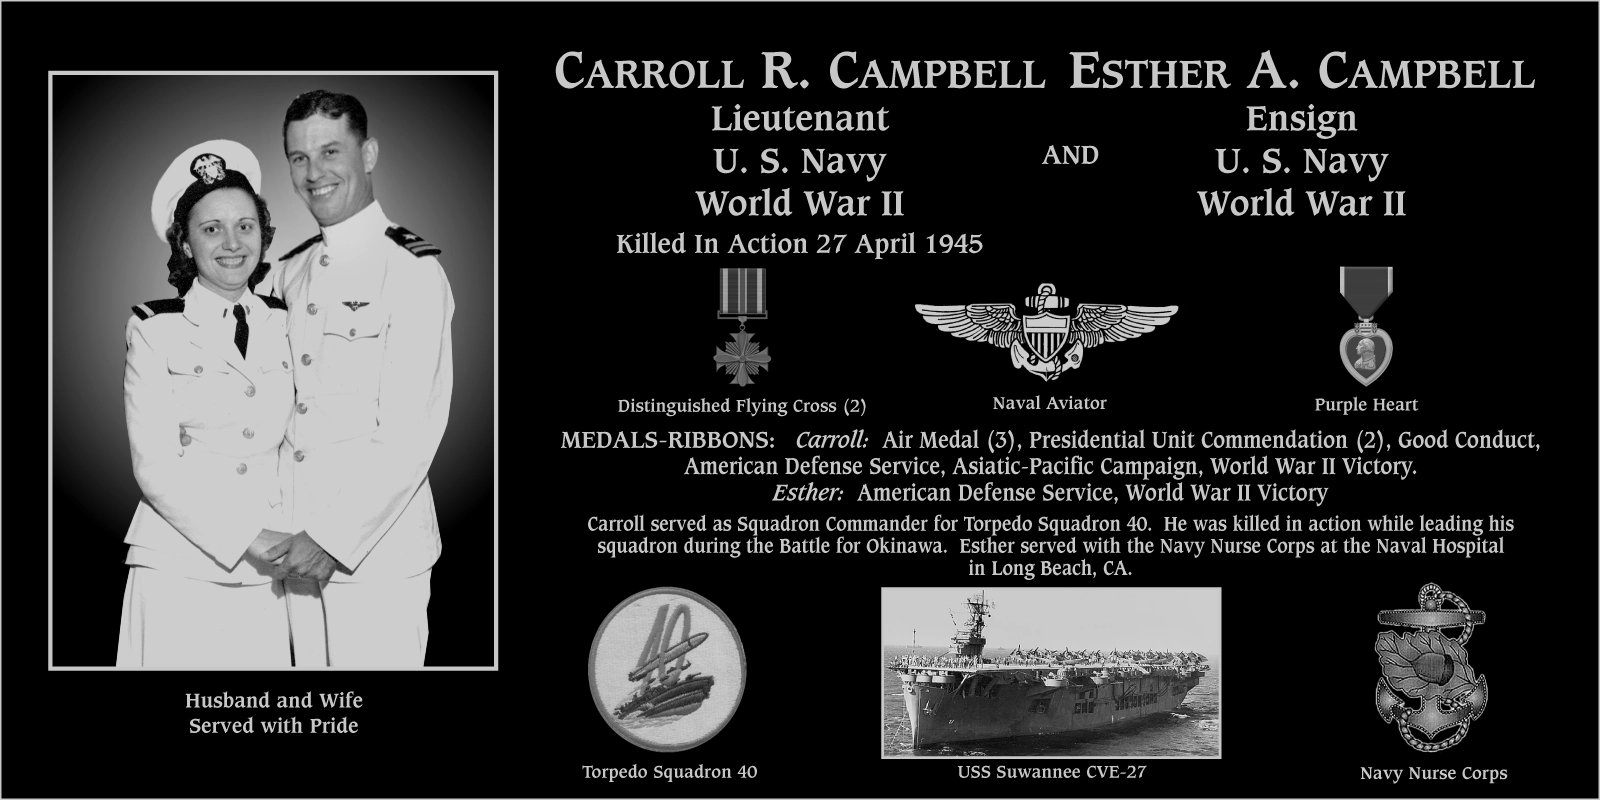 Esther A. Campbell